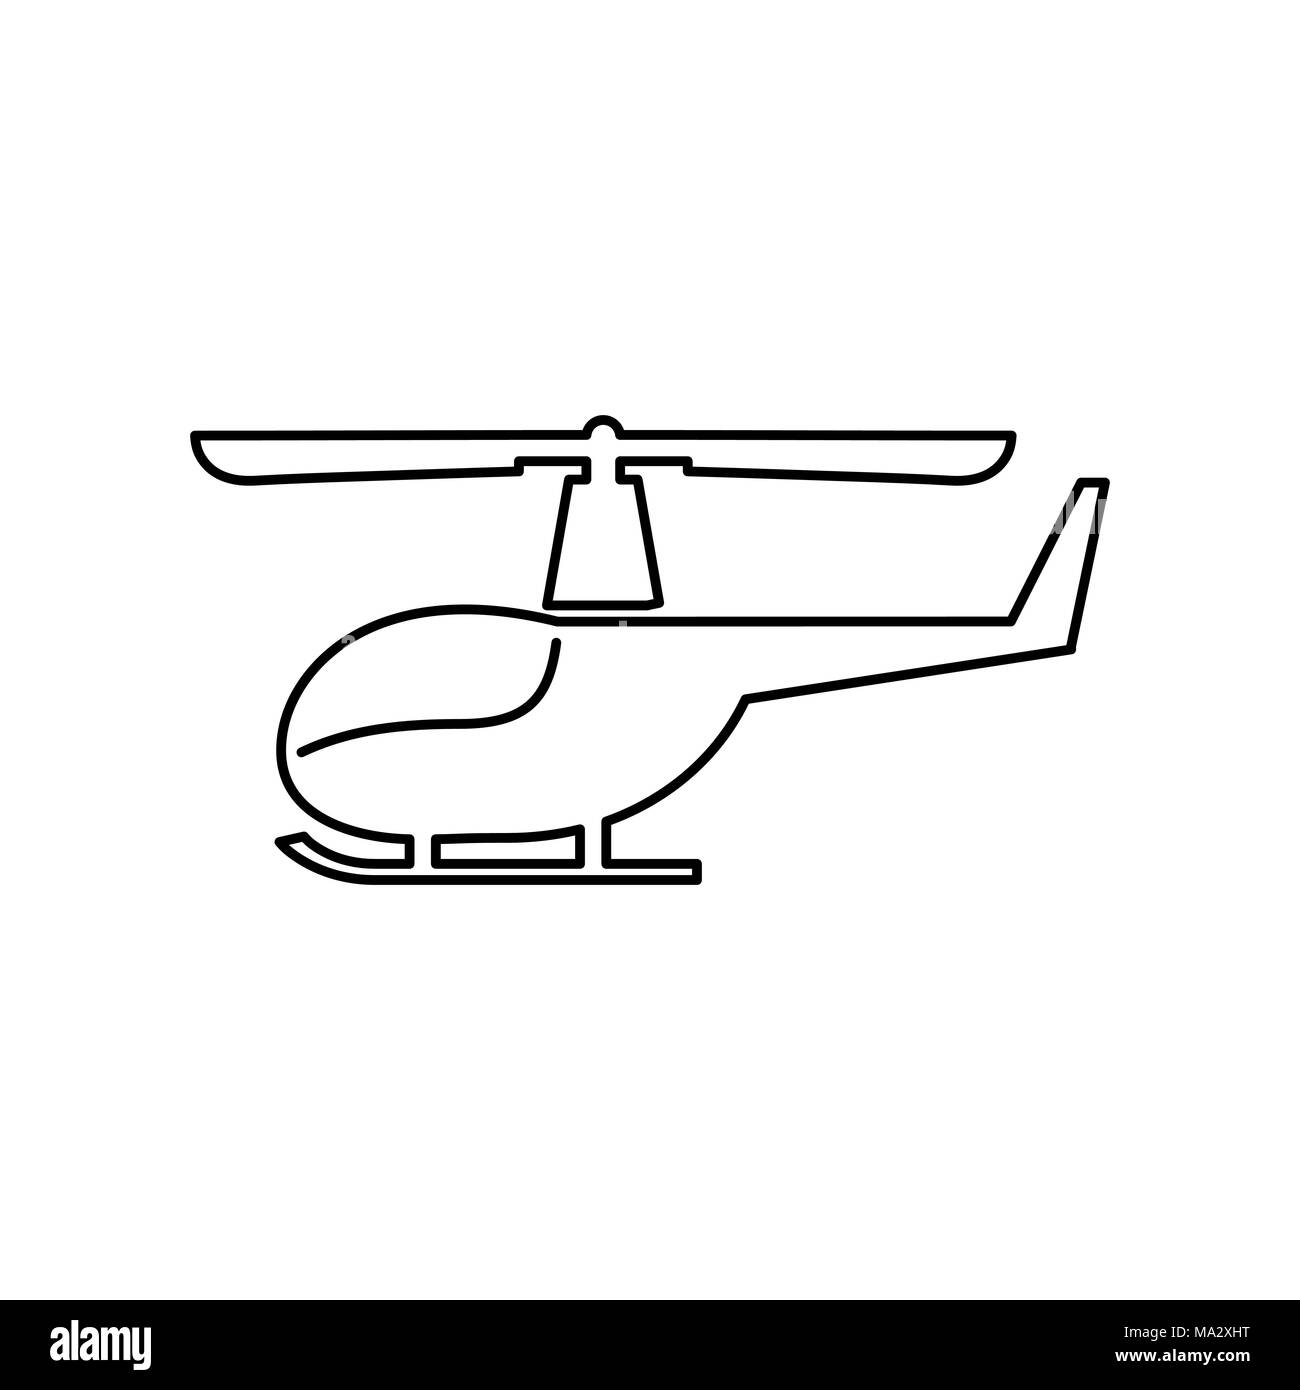 Helicopter icon simple flat vector illustration. Stock Vector